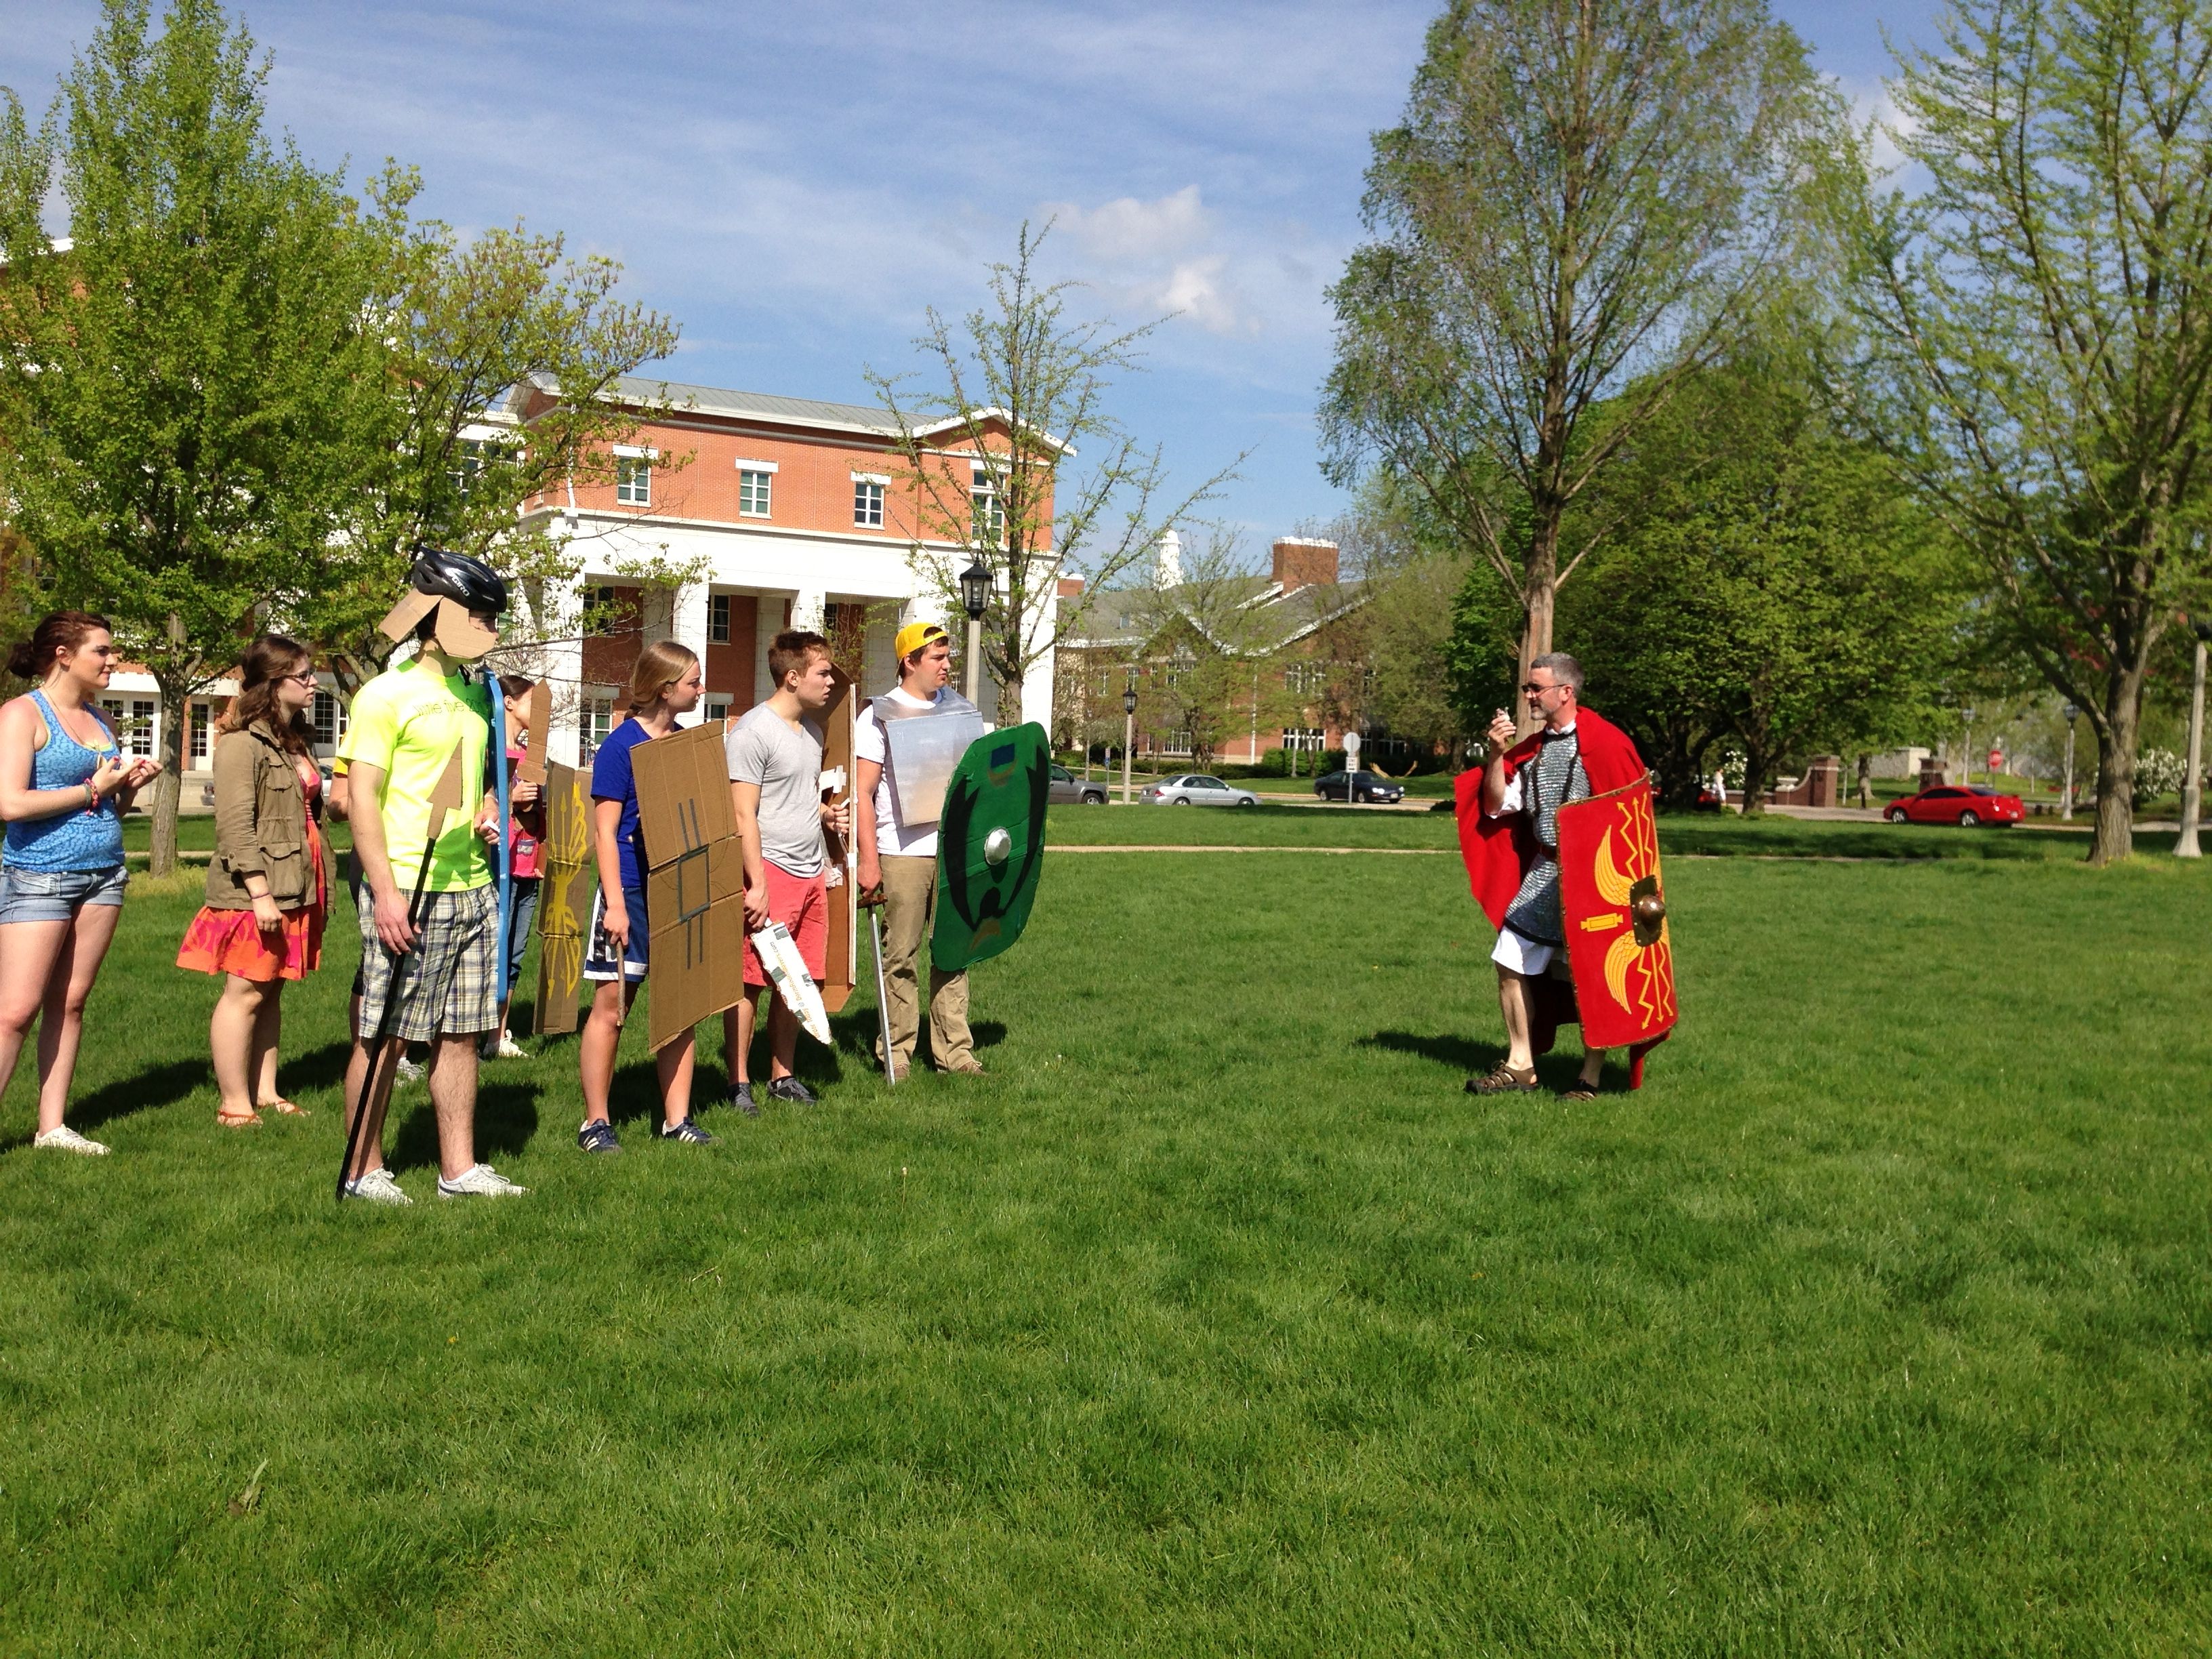 Prof. Foss, as a Roman Centurion working with students